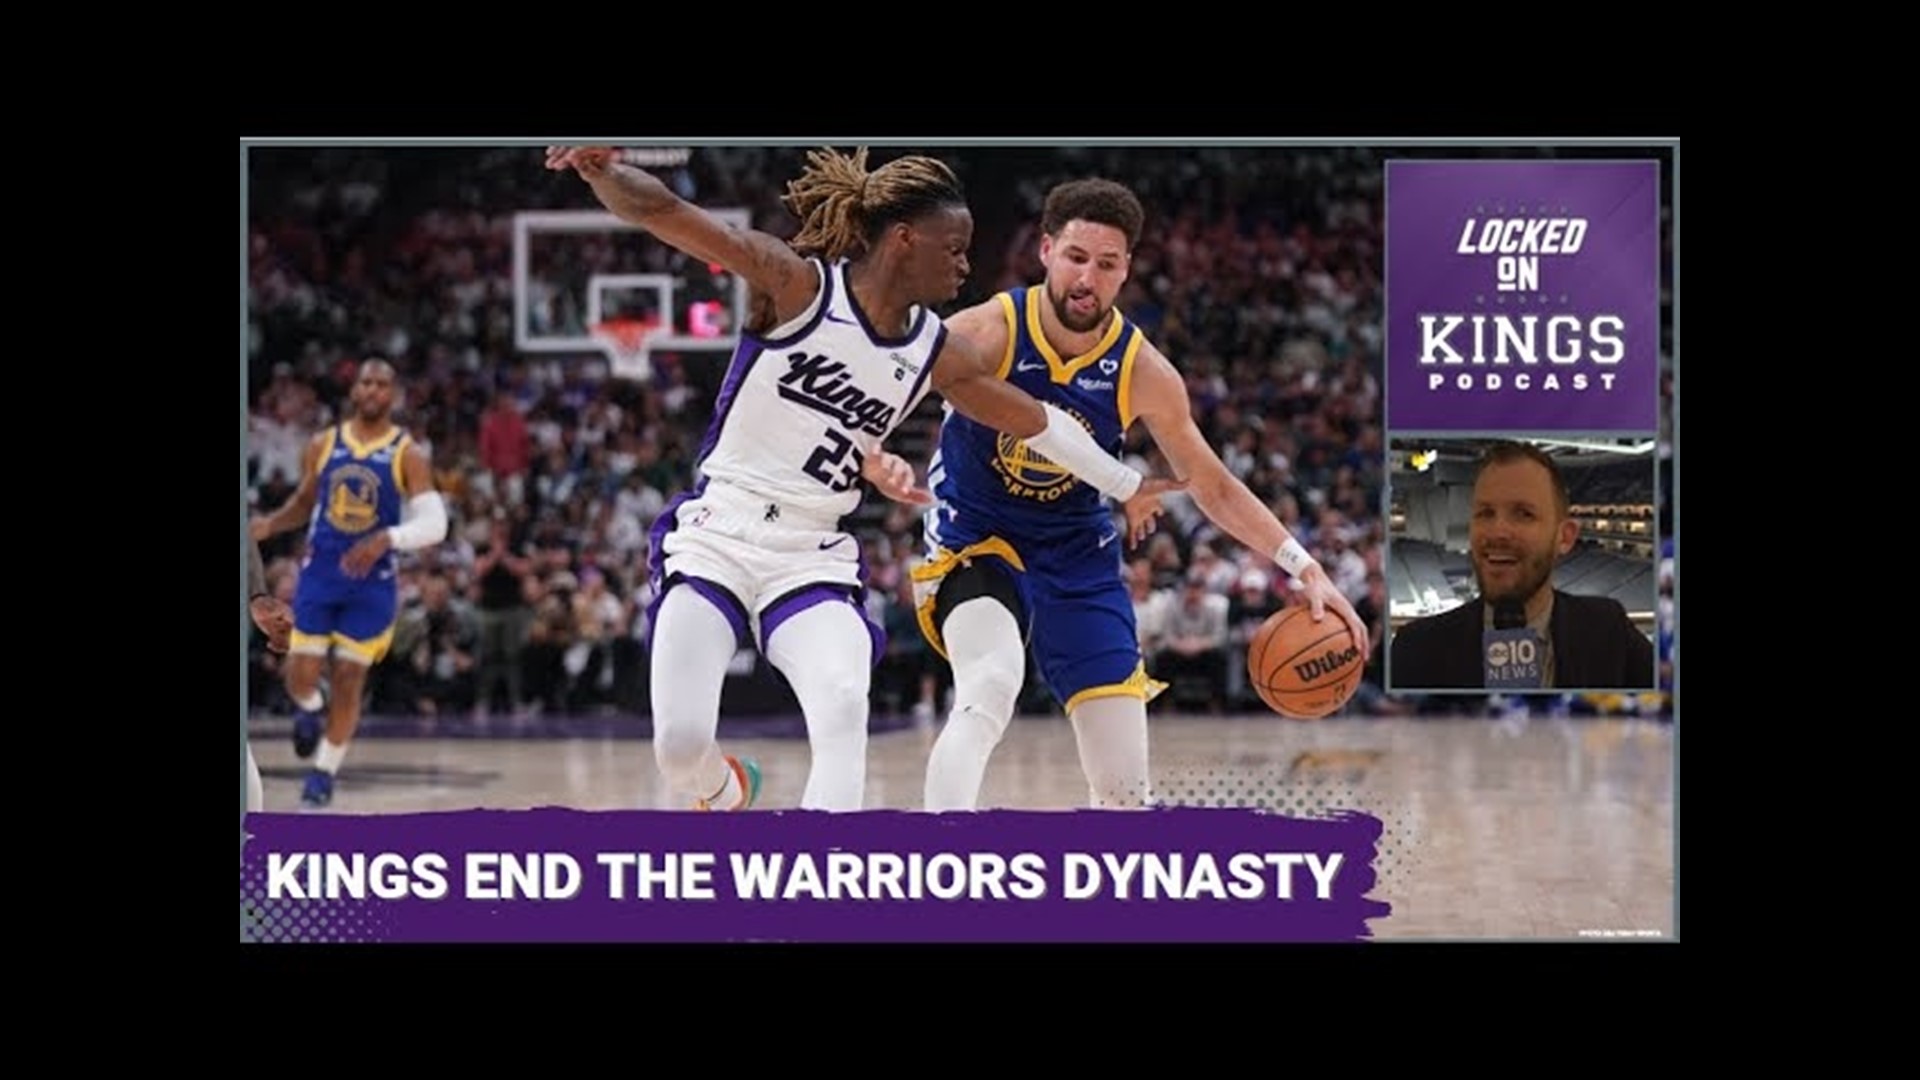 Matt George reacts to the Sacramento Kings' dominant 118-94 win in the NBA Play-In Tournament, ending the Golden State Warriors season.